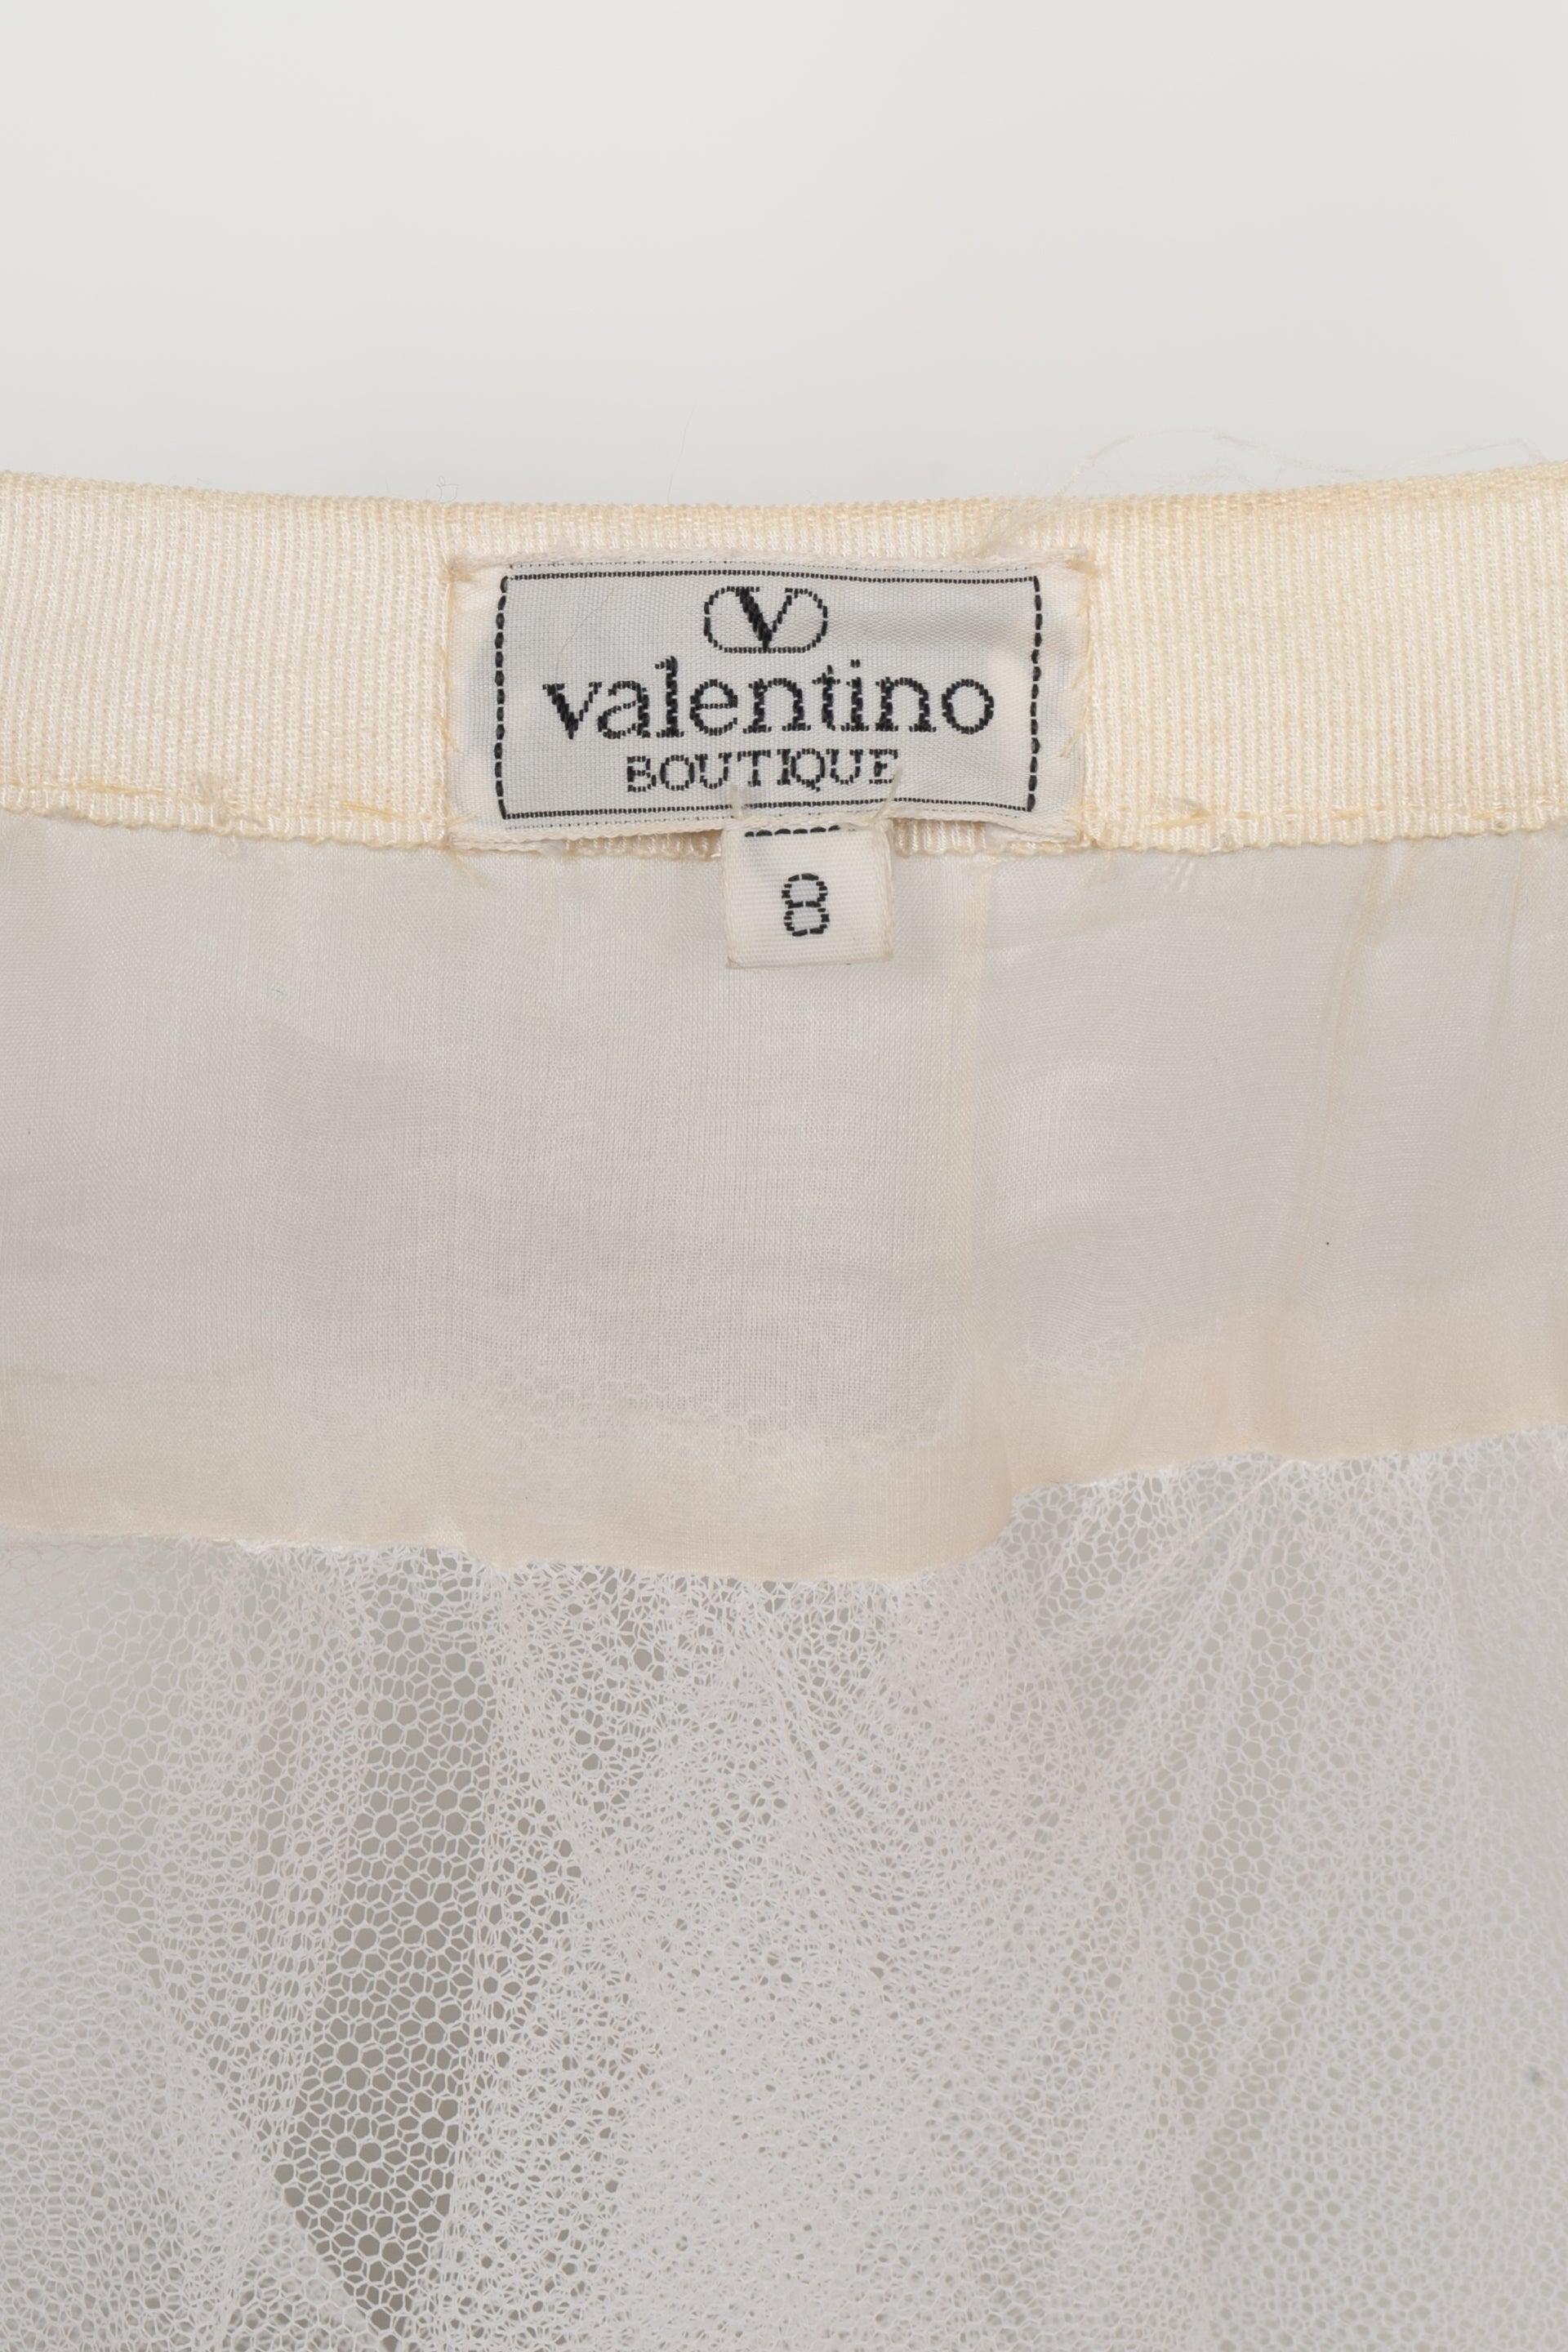 Valentino White and Blue Silk Dotted Skirt For Sale 4